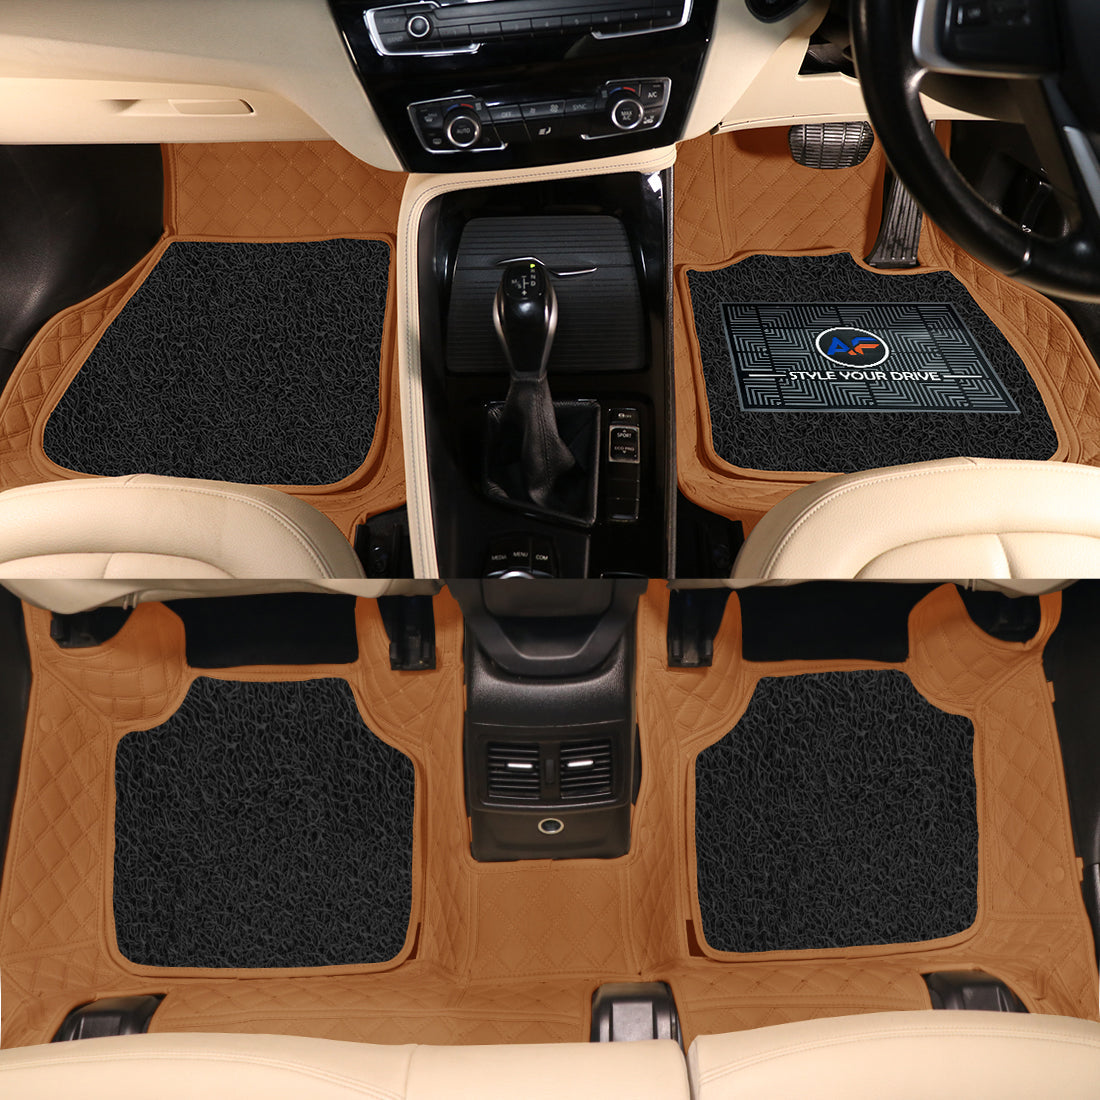 BMW 7 Series 2016-18-7D Luxury Car Mat, All Weather Proof, Anti-Skid, 100% Waterproof & Odorless with Unique Diamond Fish Design (24mm Luxury PU Leather, 2 Rows)